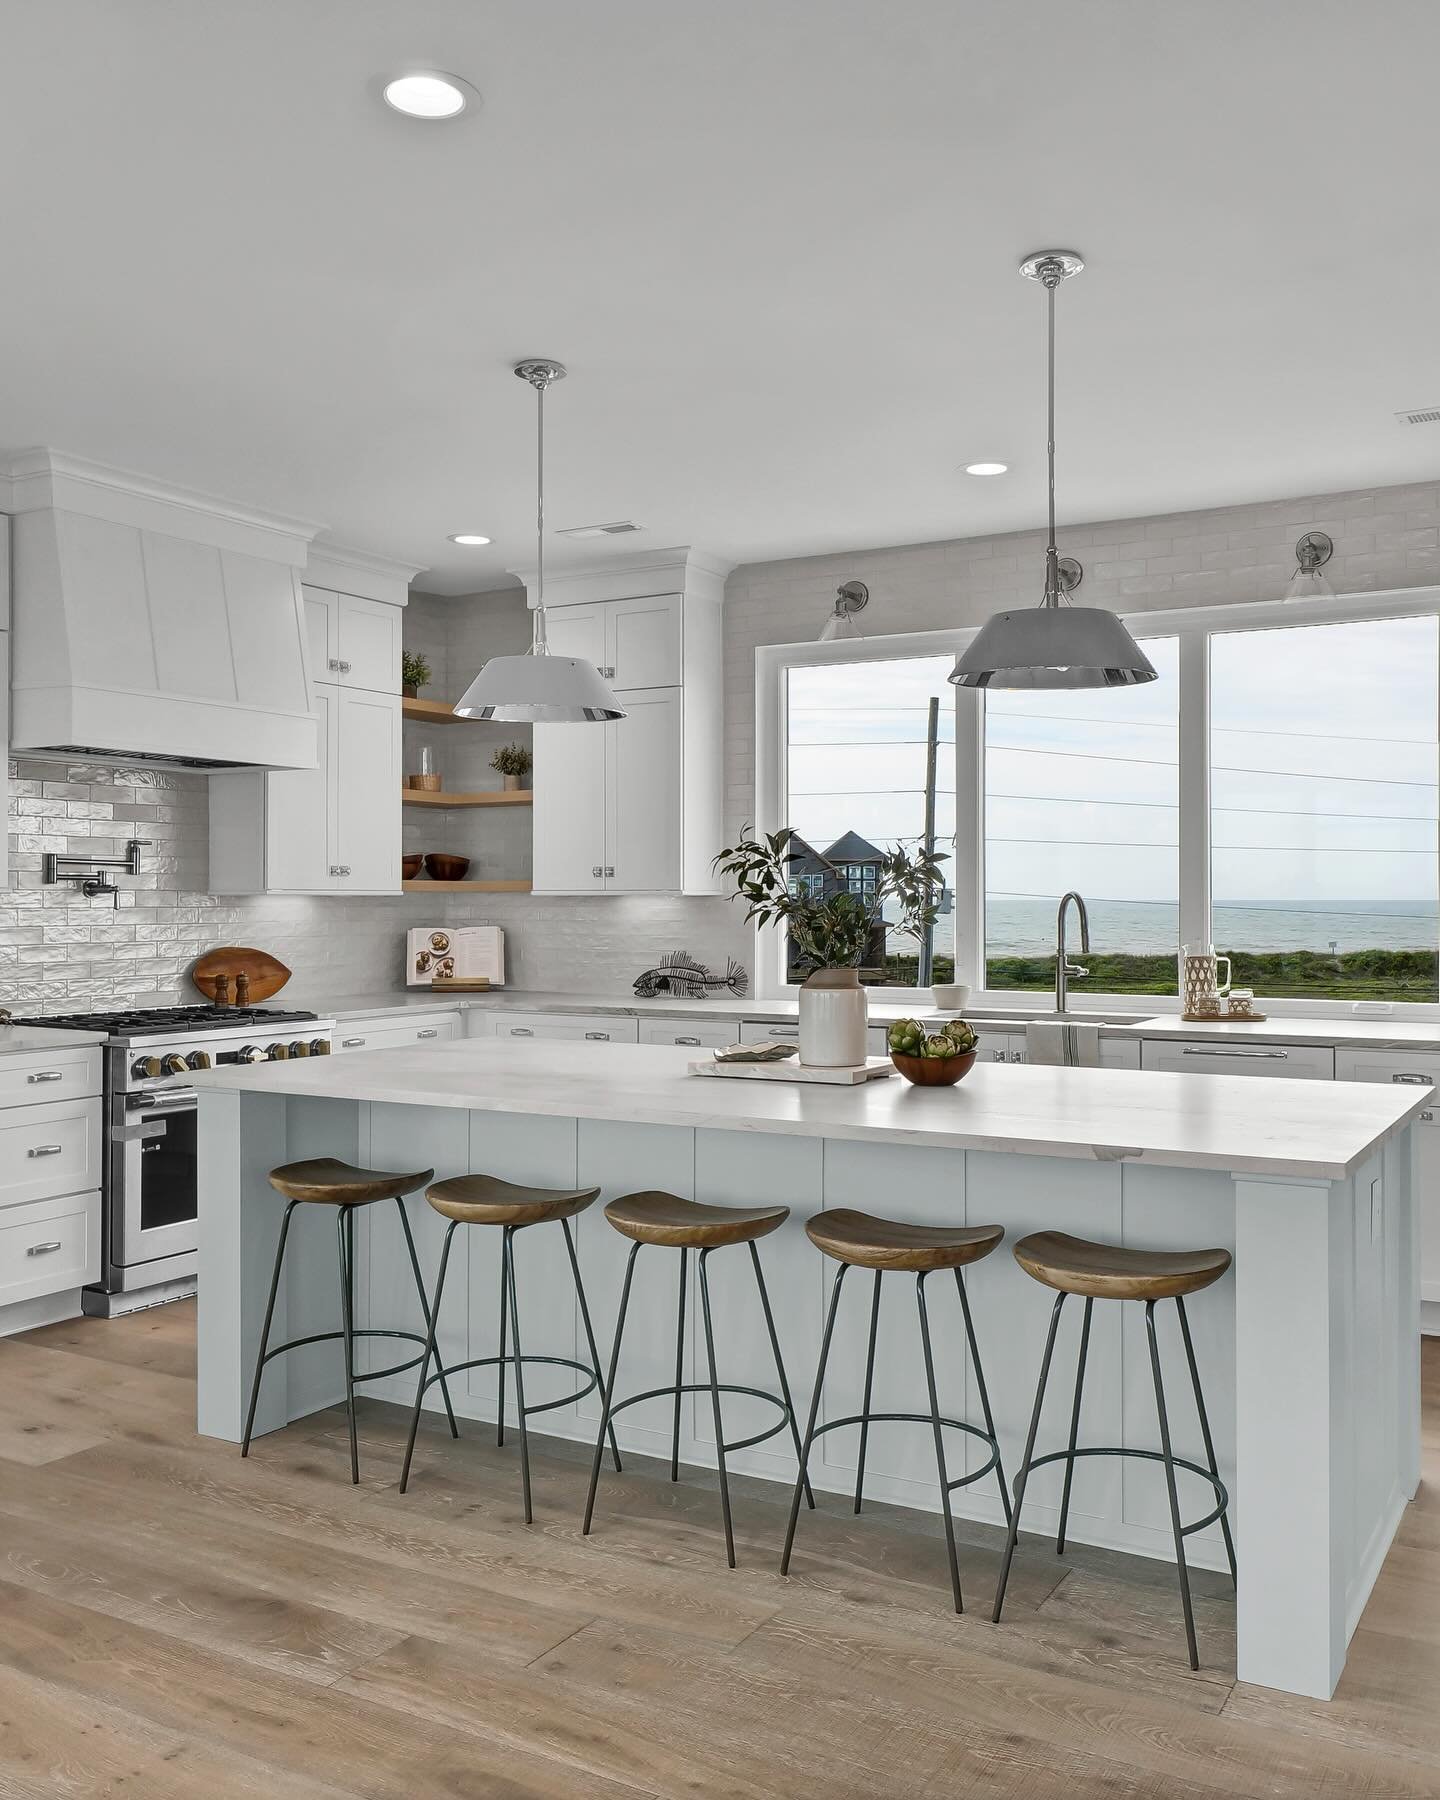 A stunning North Topsail Beach kitchen.

With ocean views around every corner, this space is full of light and serenity. We love the combination of beautiful nickel hardware, open shelving and our @kraftmaid Cabinetry.

#kitchendesign #kitcheninspo #